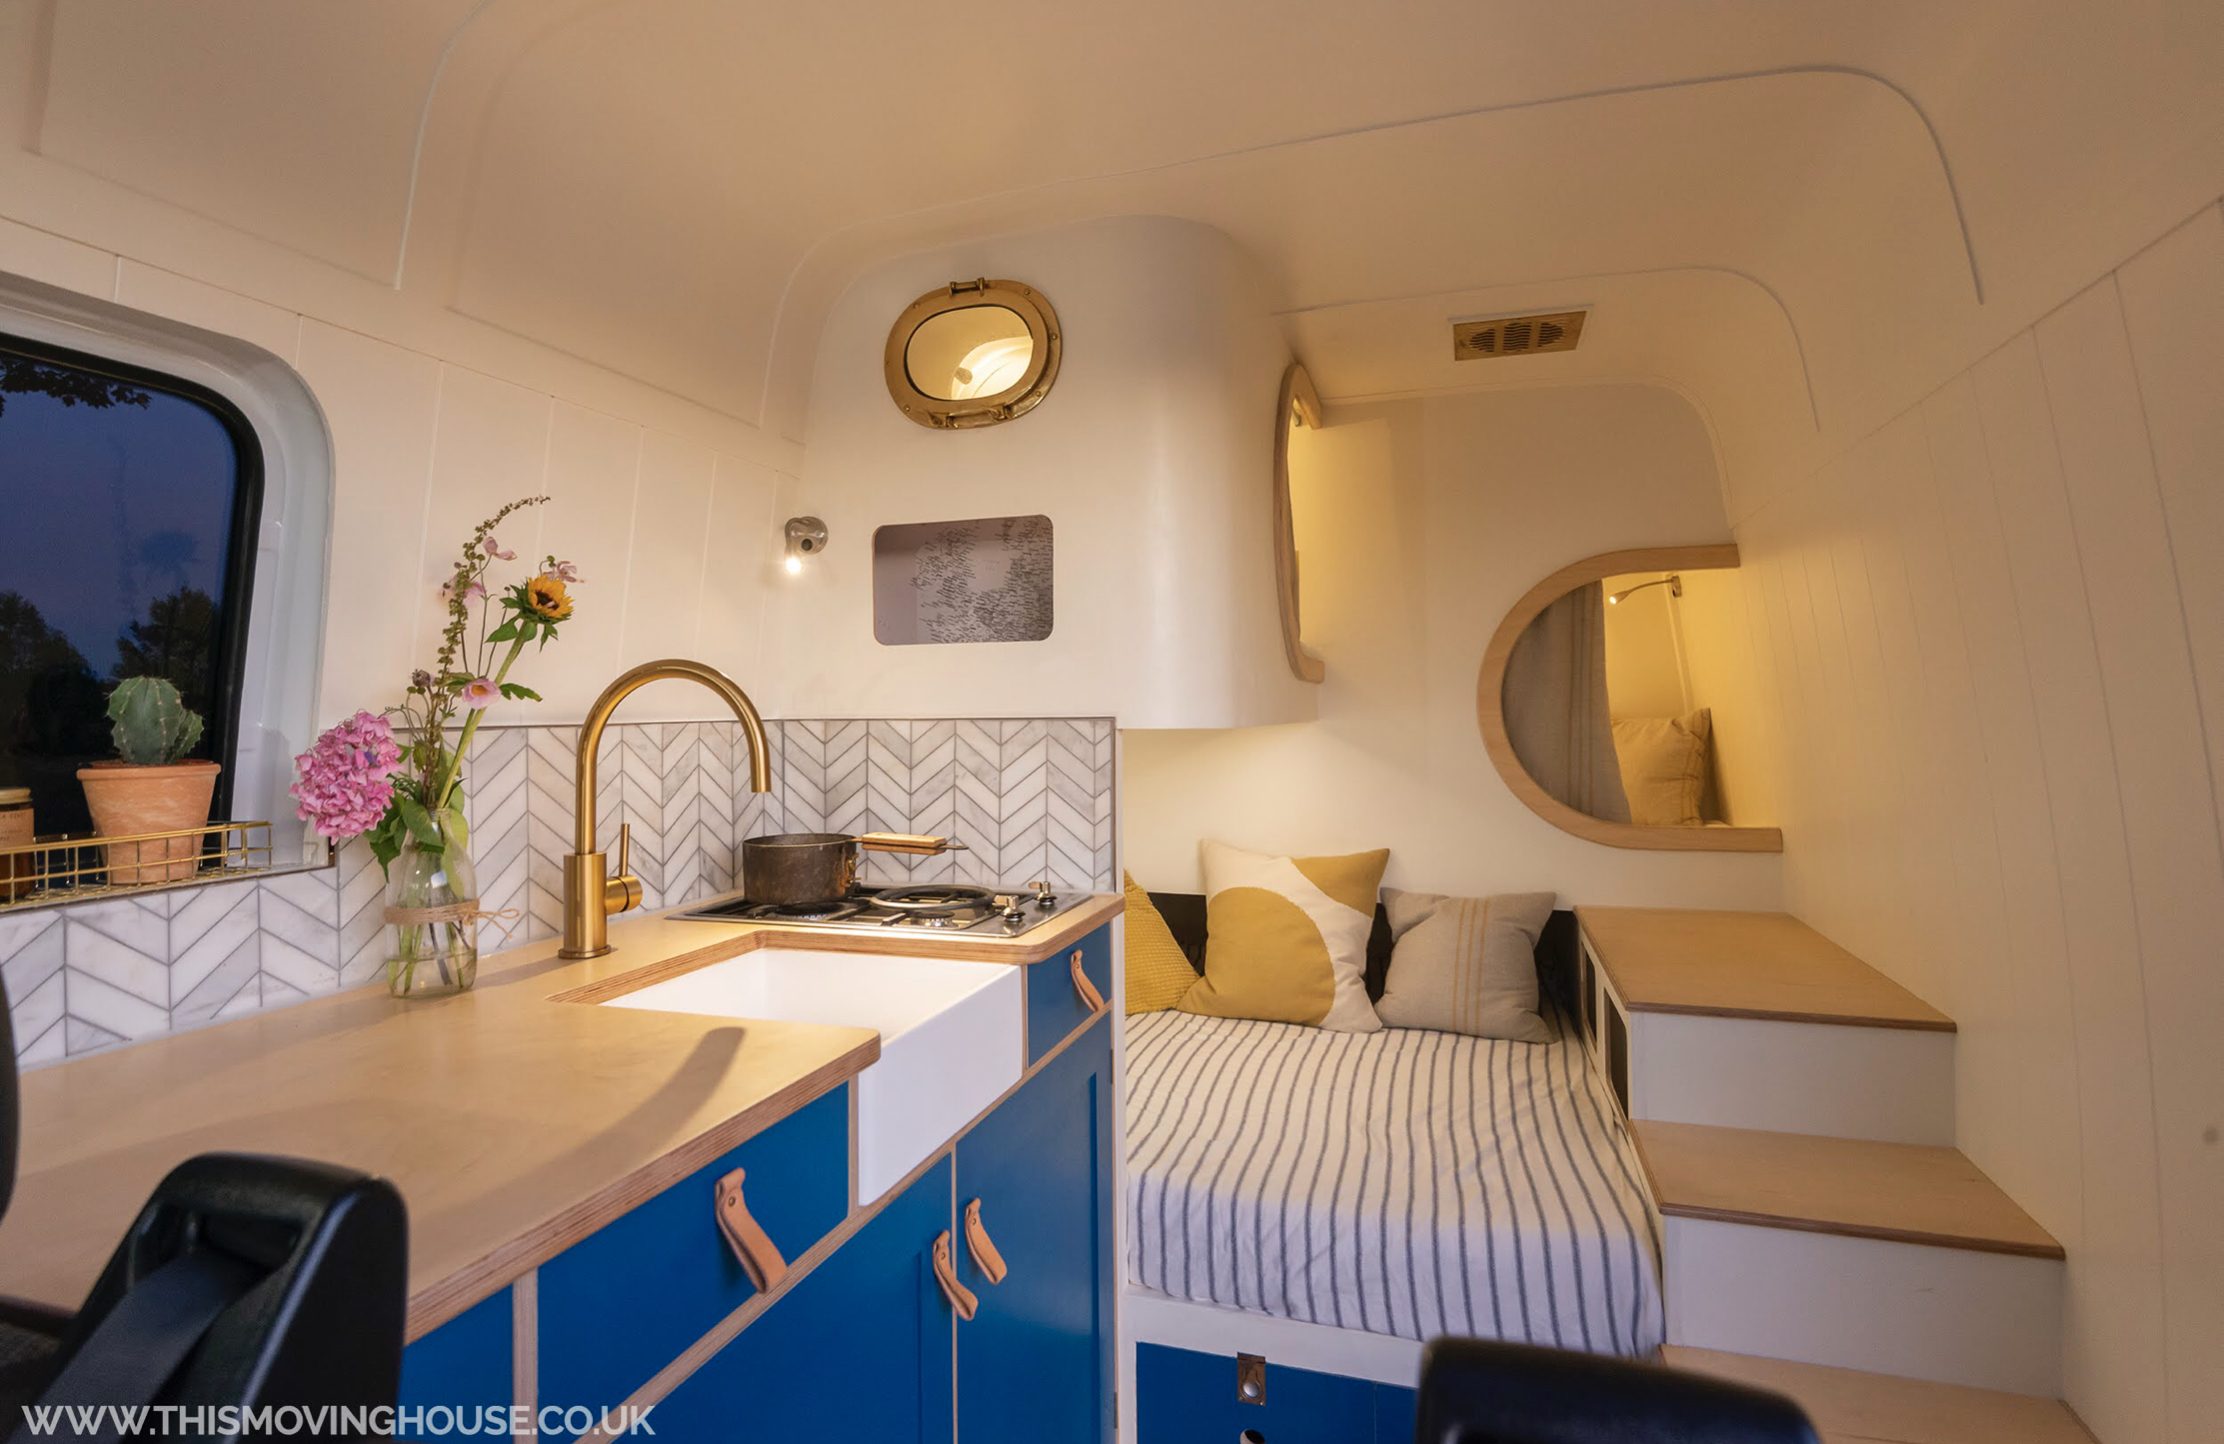 Campervan Bed Ideas And Styles To Inspire Your Next Build